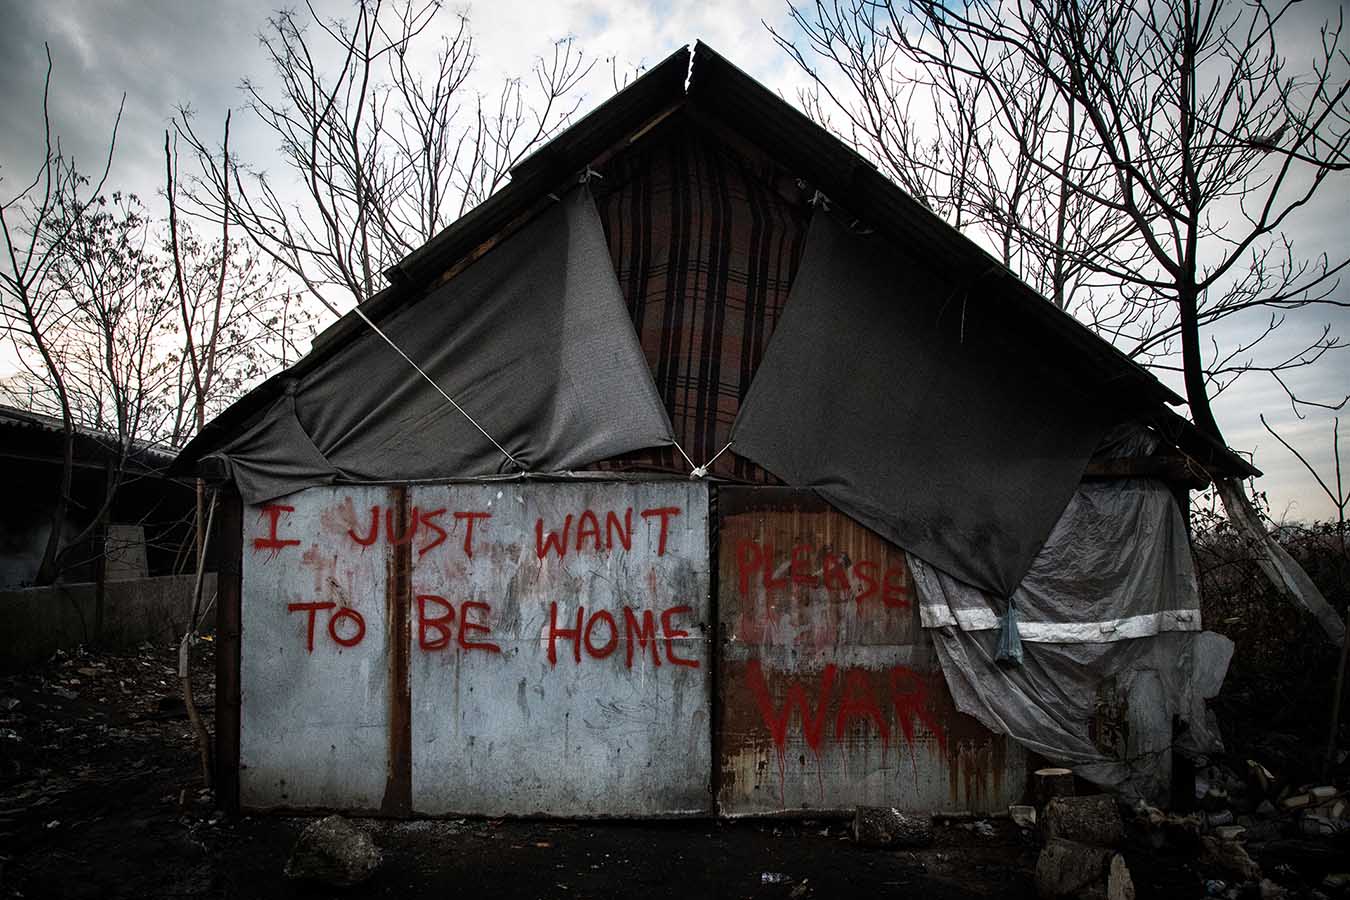  A metail shack with graffiti reading "I just want to be home.", inside the abandoned industrial complex turned into makeshift refugee camp, in the area of Belgrade's Central Station.  